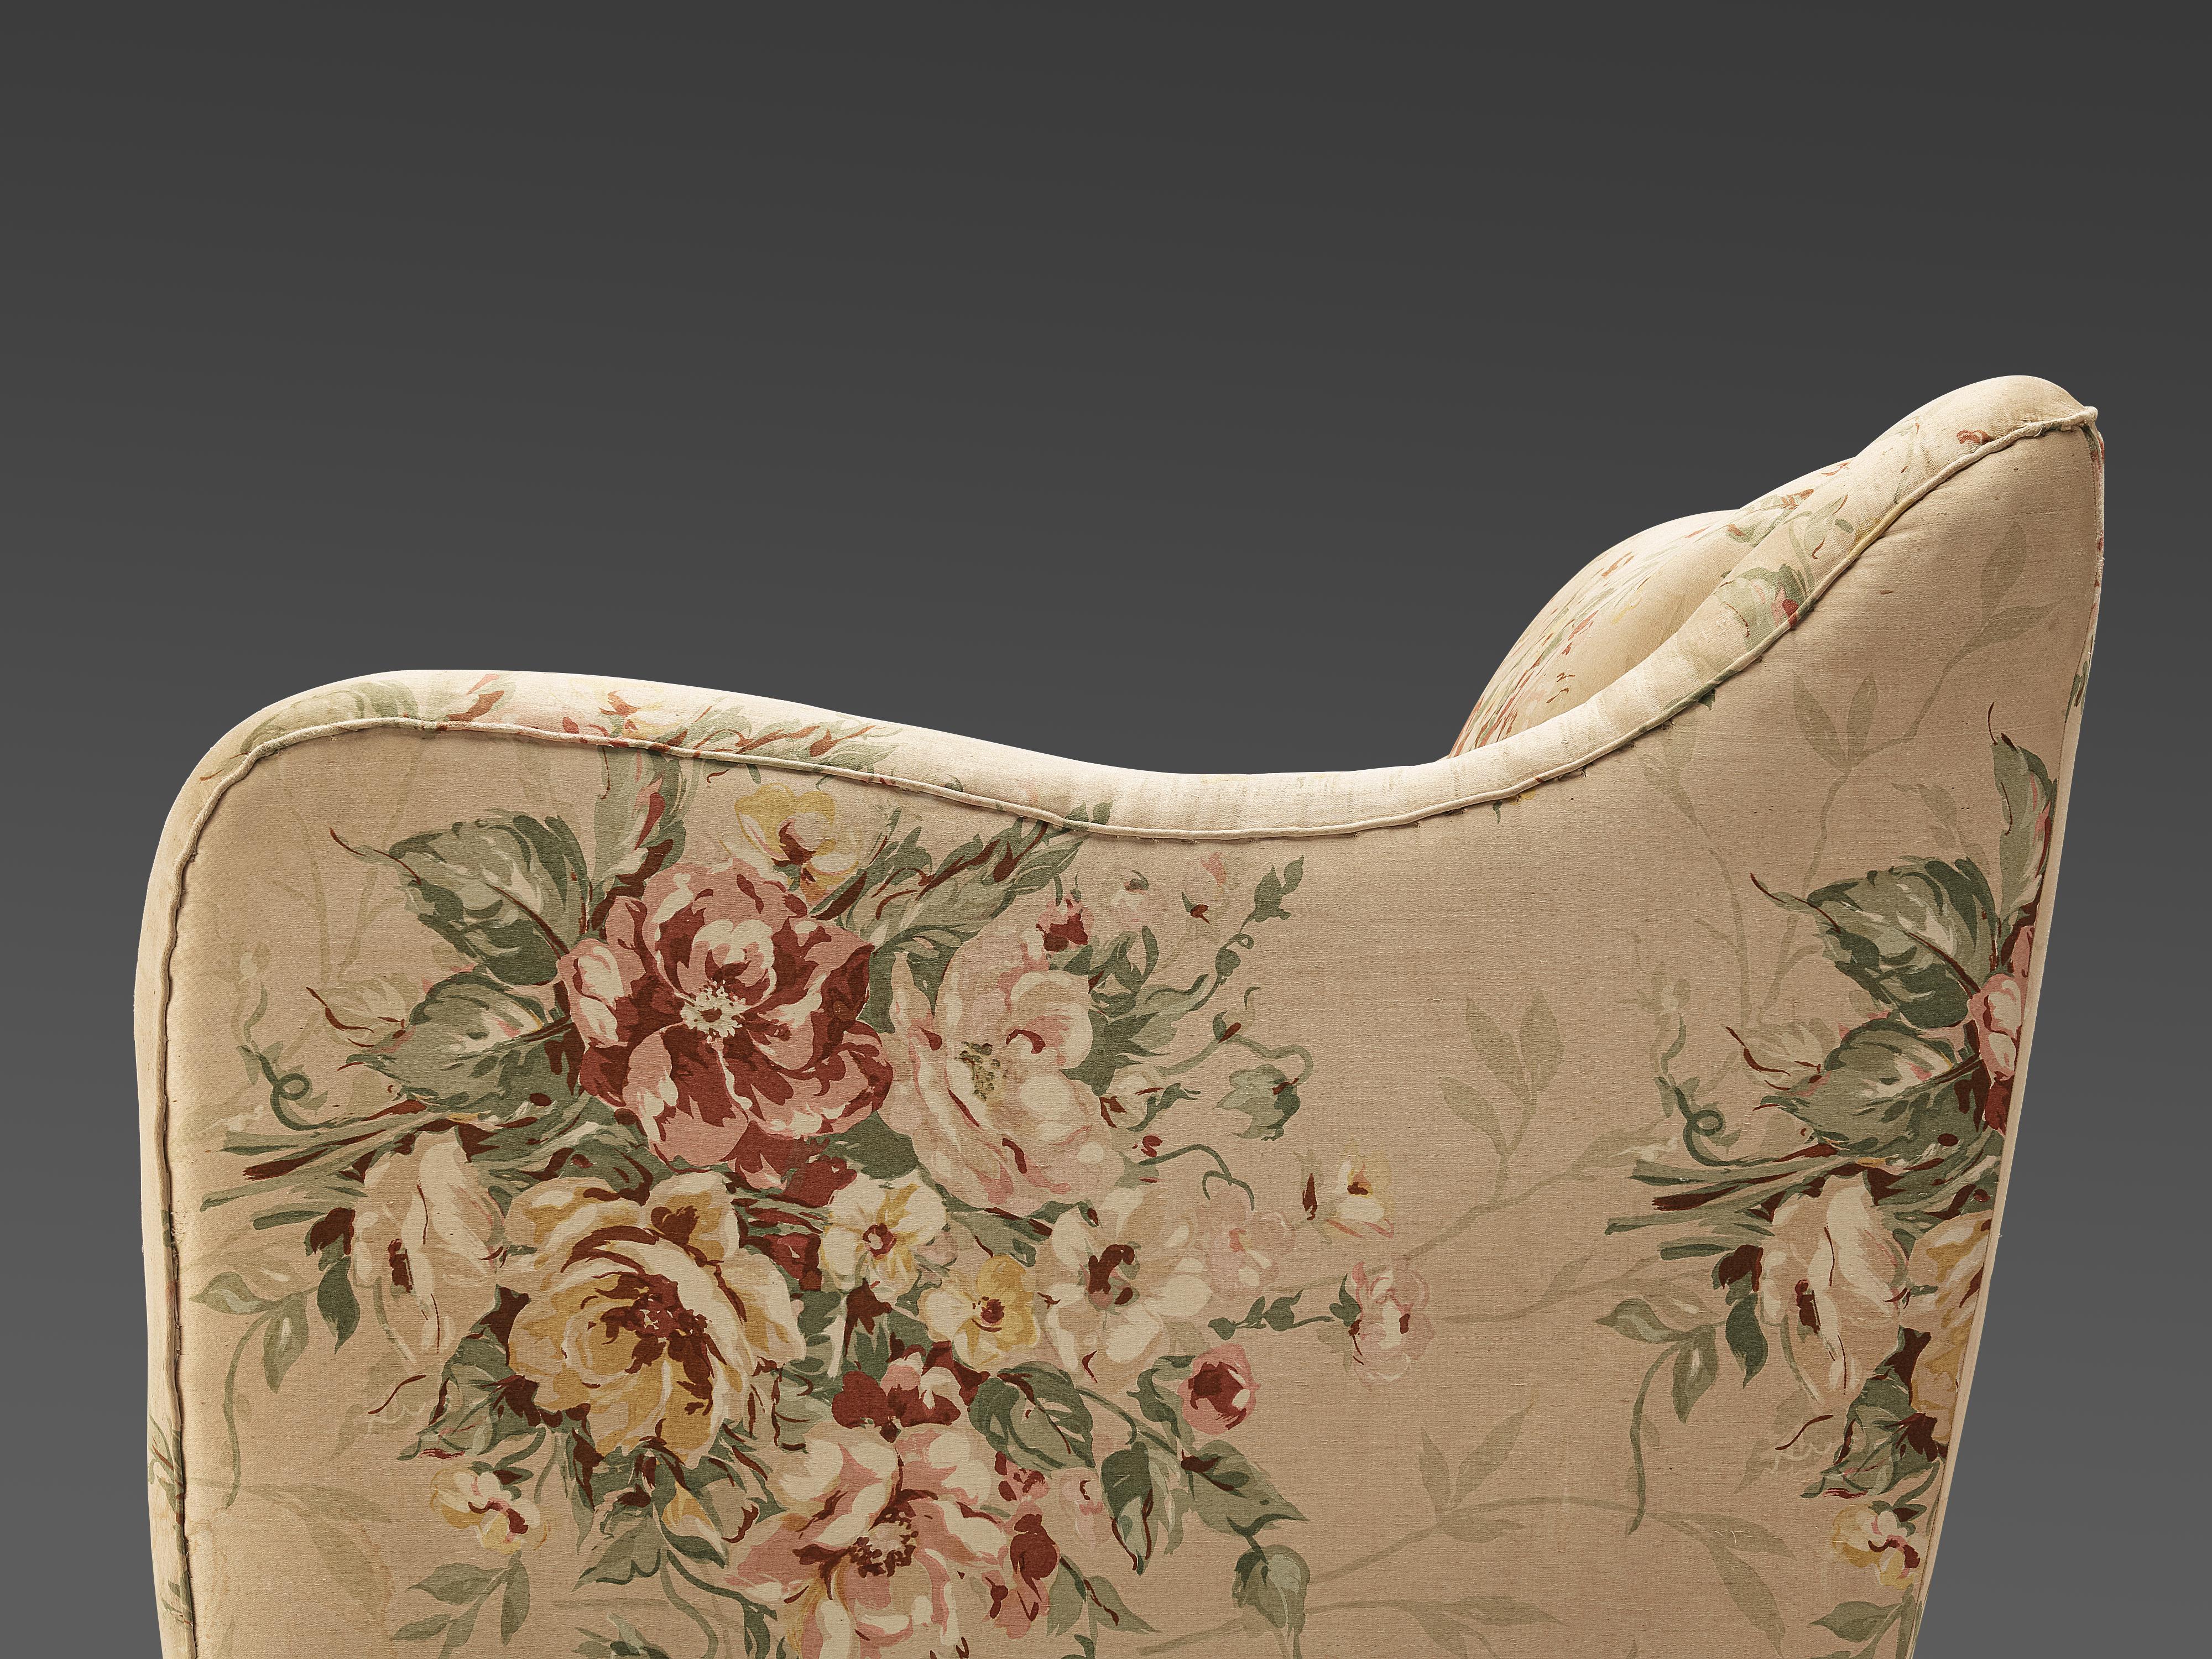 Fabric Melchiorre Bega Pair of Lounge Chairs in Floral Upholstery, 1930s